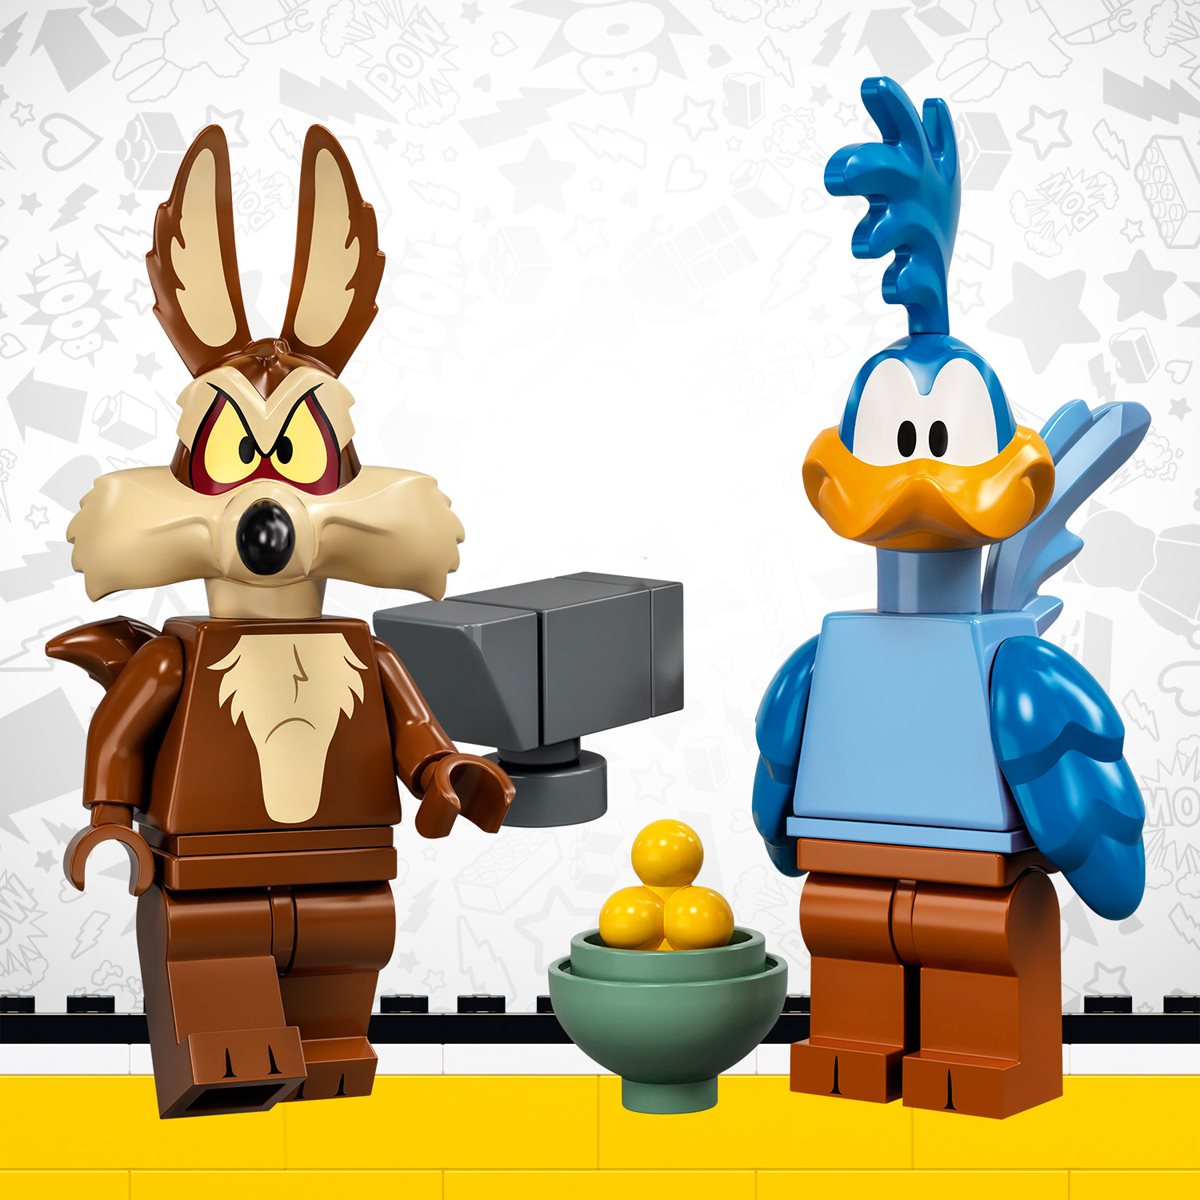 LEGO LOONEY TUNES  MINIFIGURE WILE E COYOTE 71030 BUY 3 GET 4TH FREE